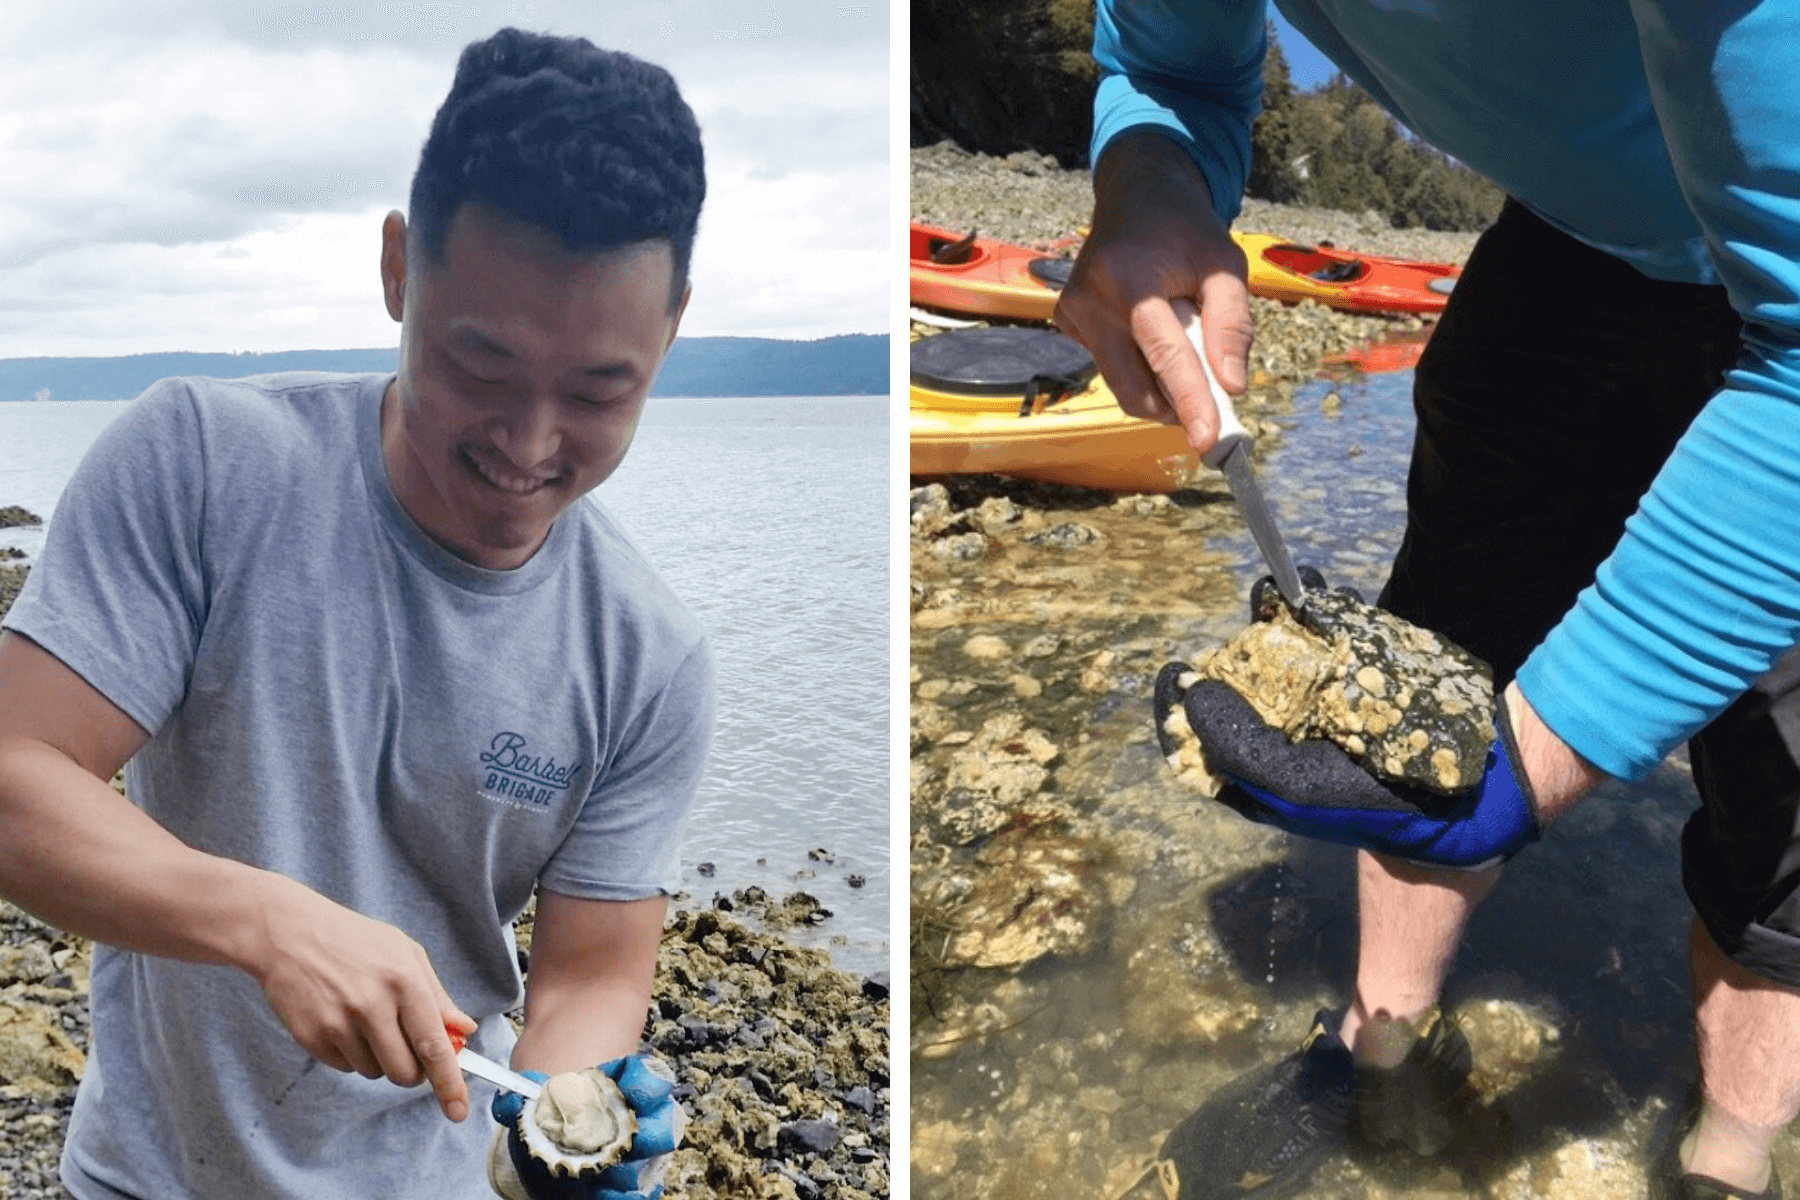 A man uses a small knife to shuck an oyster along a rocky shorline after kayaking in Washington.